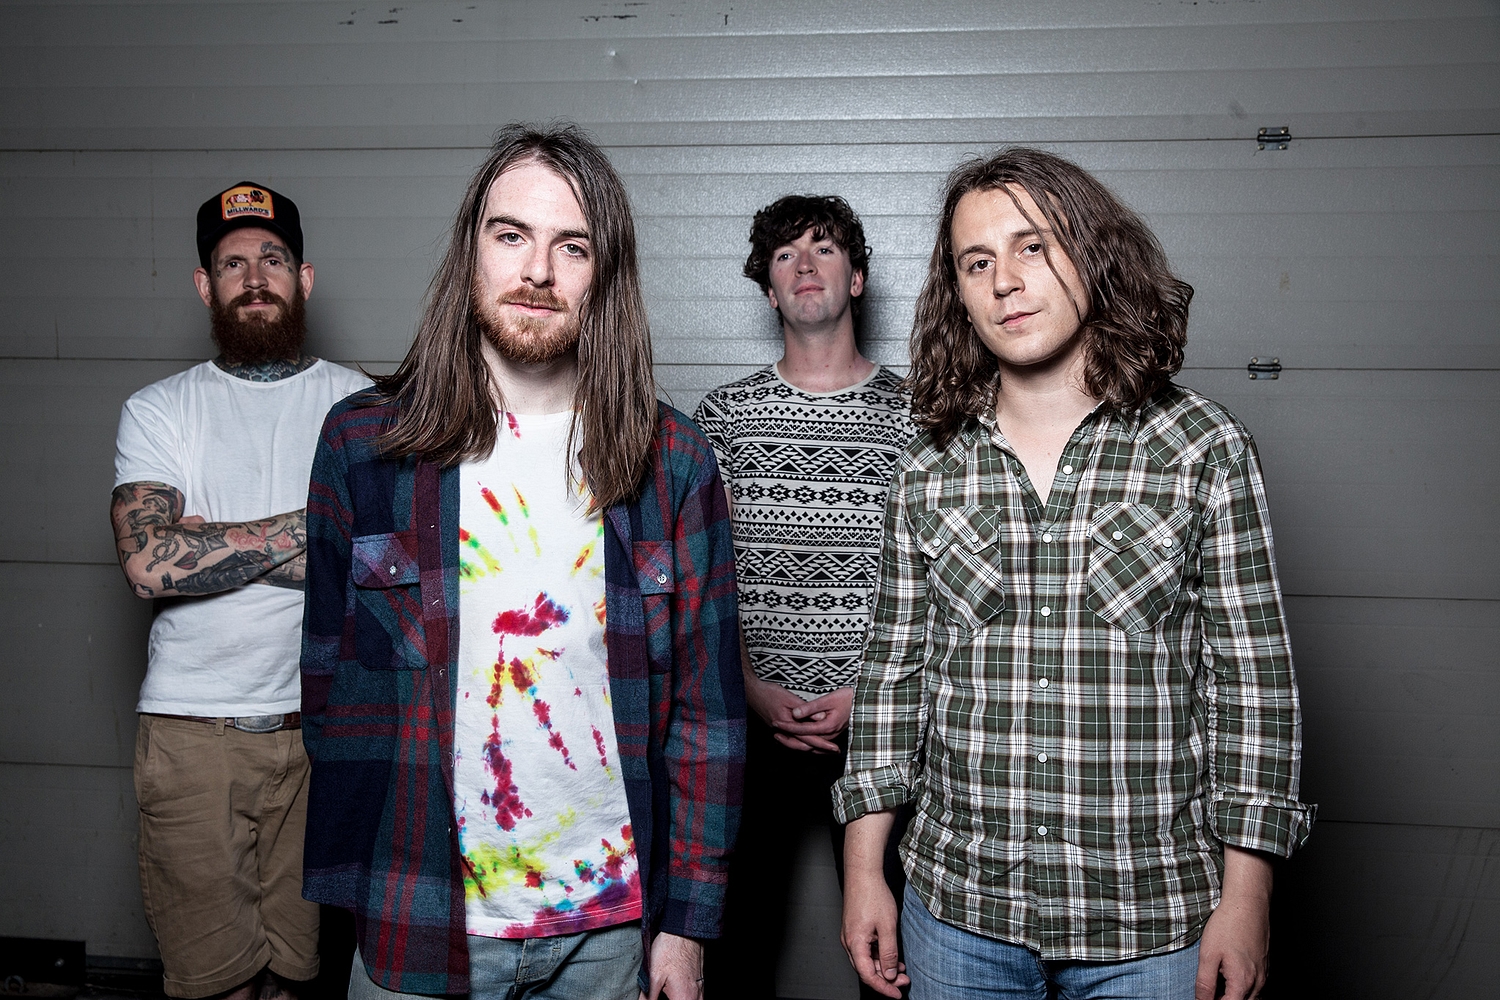 Pulled Apart By Horses: “We’re ready to take control”